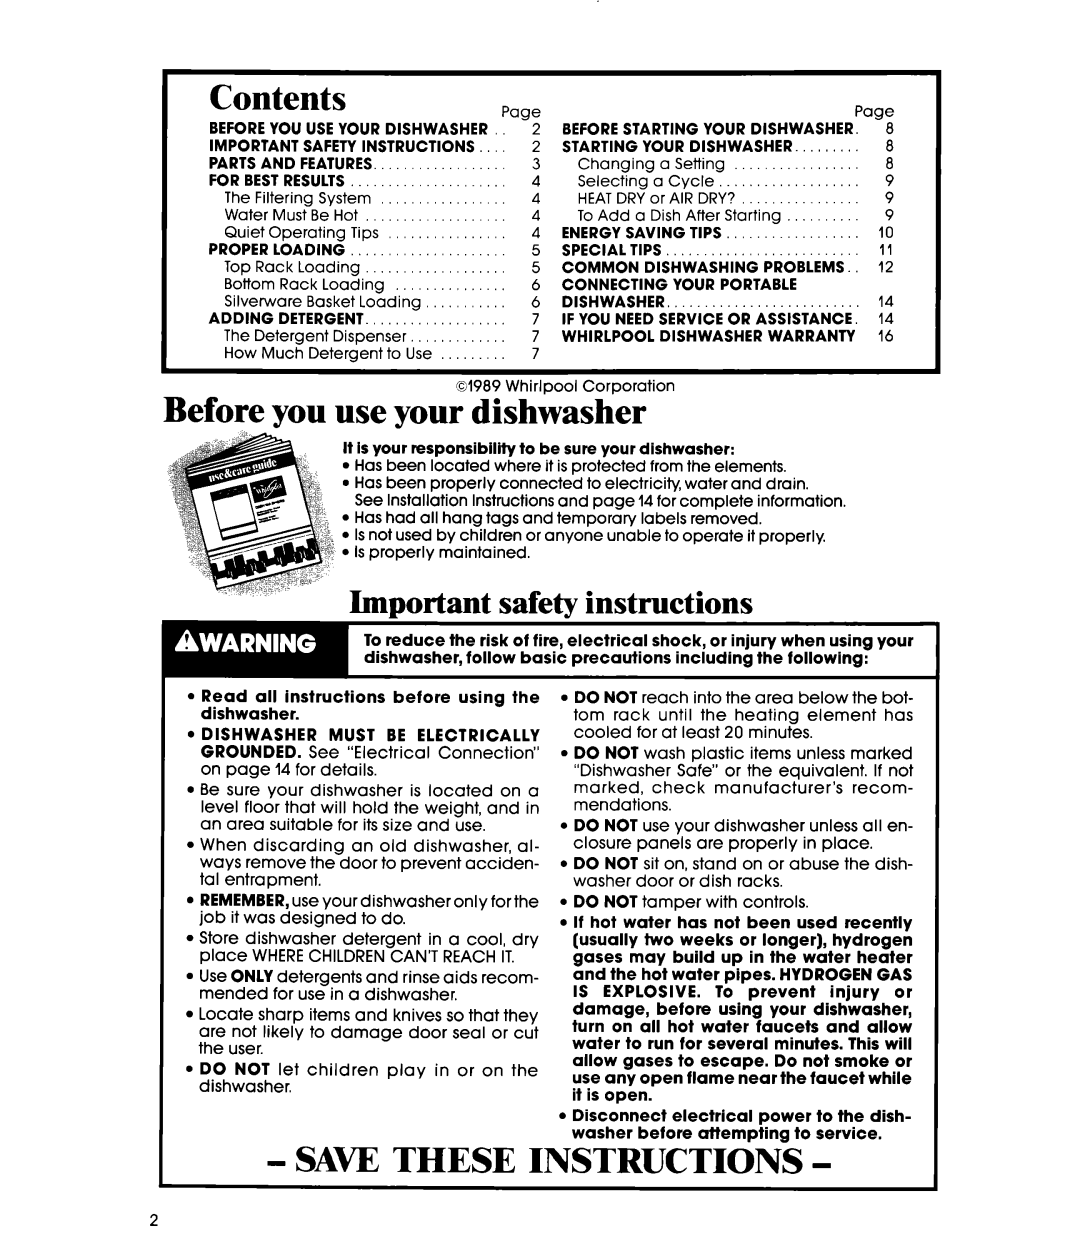 Whirlpool DP3000XR Series Contents, Before you use your dishwasher, Save These Instructions, Important safety instructions 